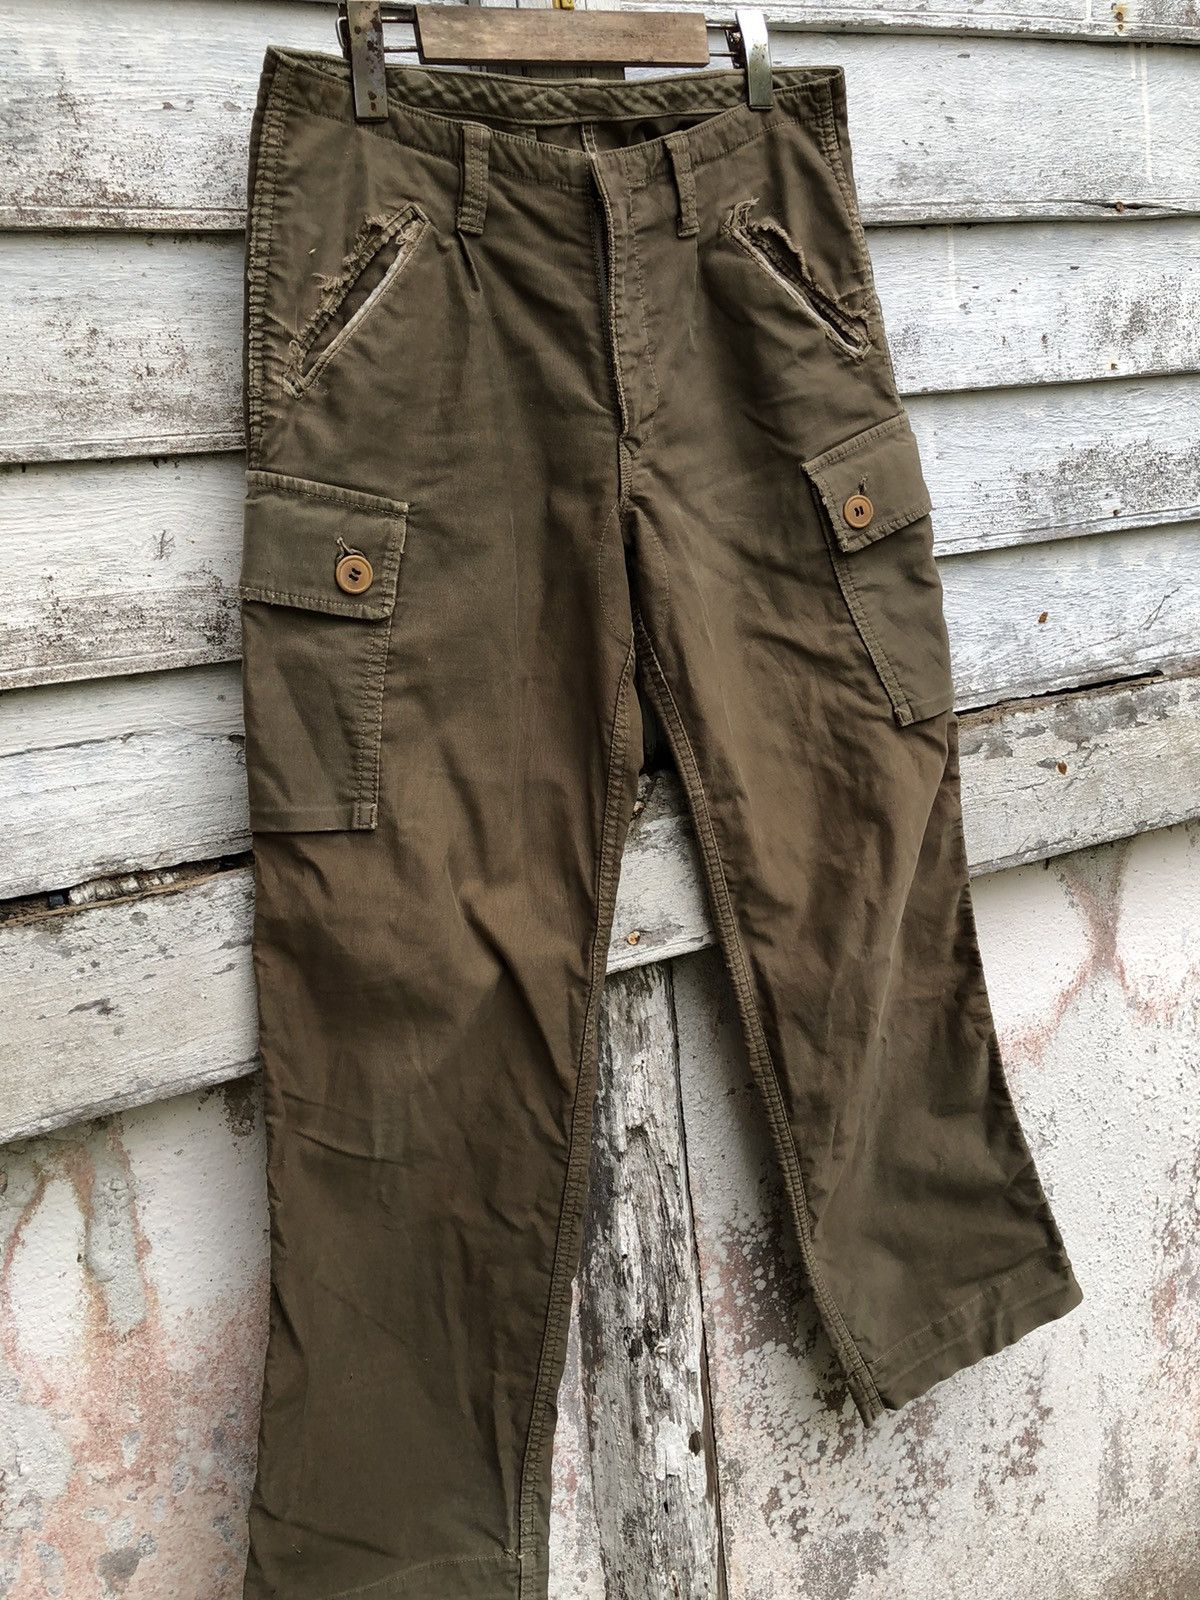 Distressed Sunfaded Hollywood Ranch Heavy Duty Cargo Pant - 3